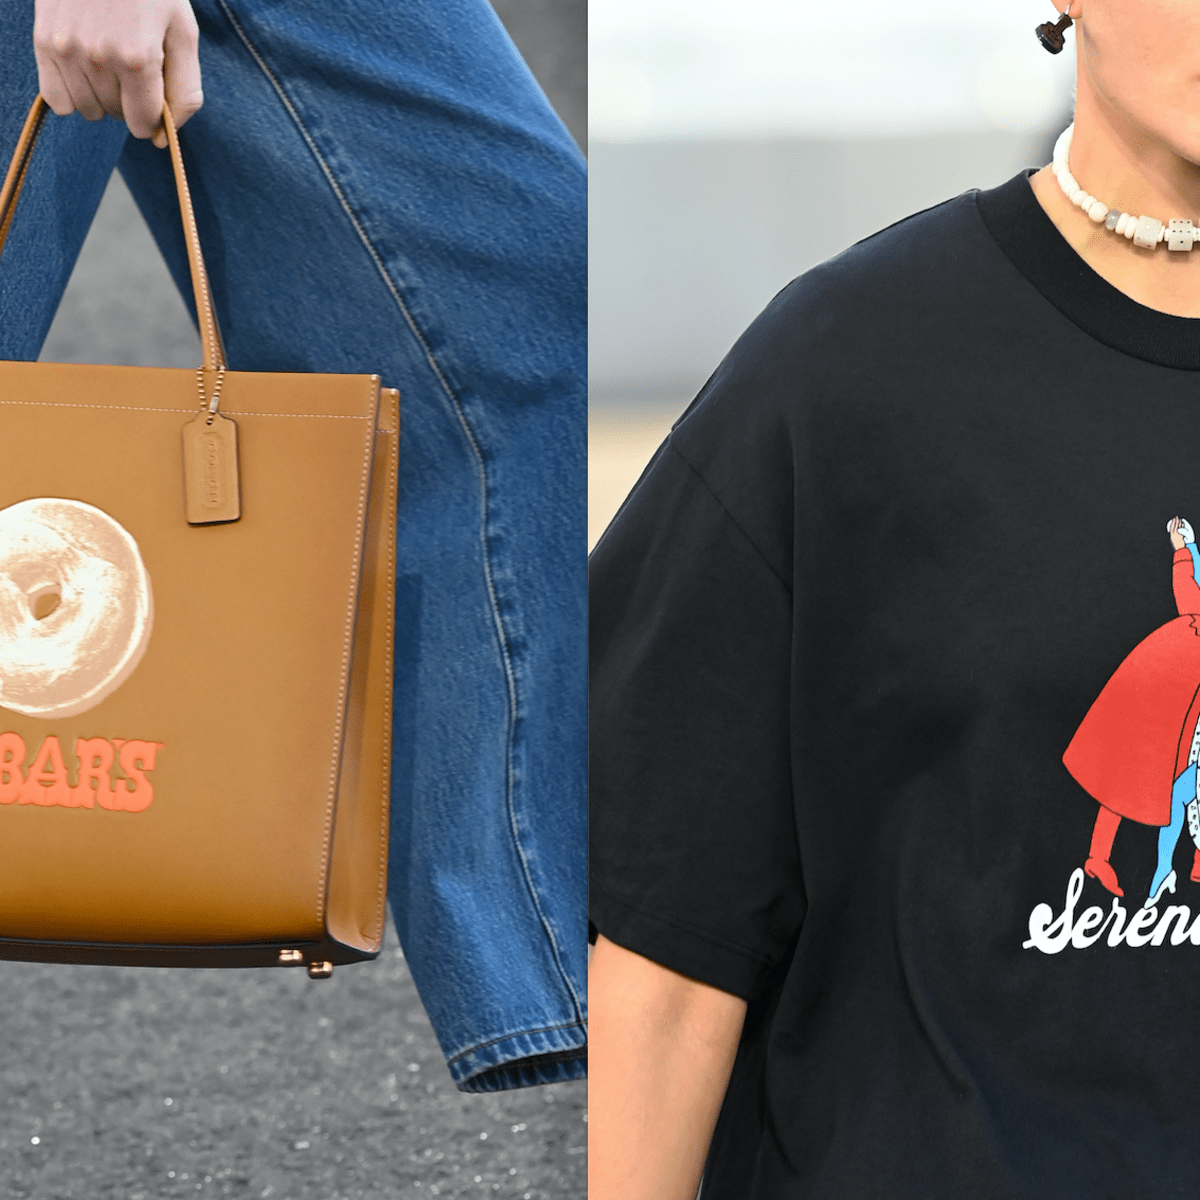 Coach's Chic Homage To Zabar's Is The Ultimate NYC Must-Have